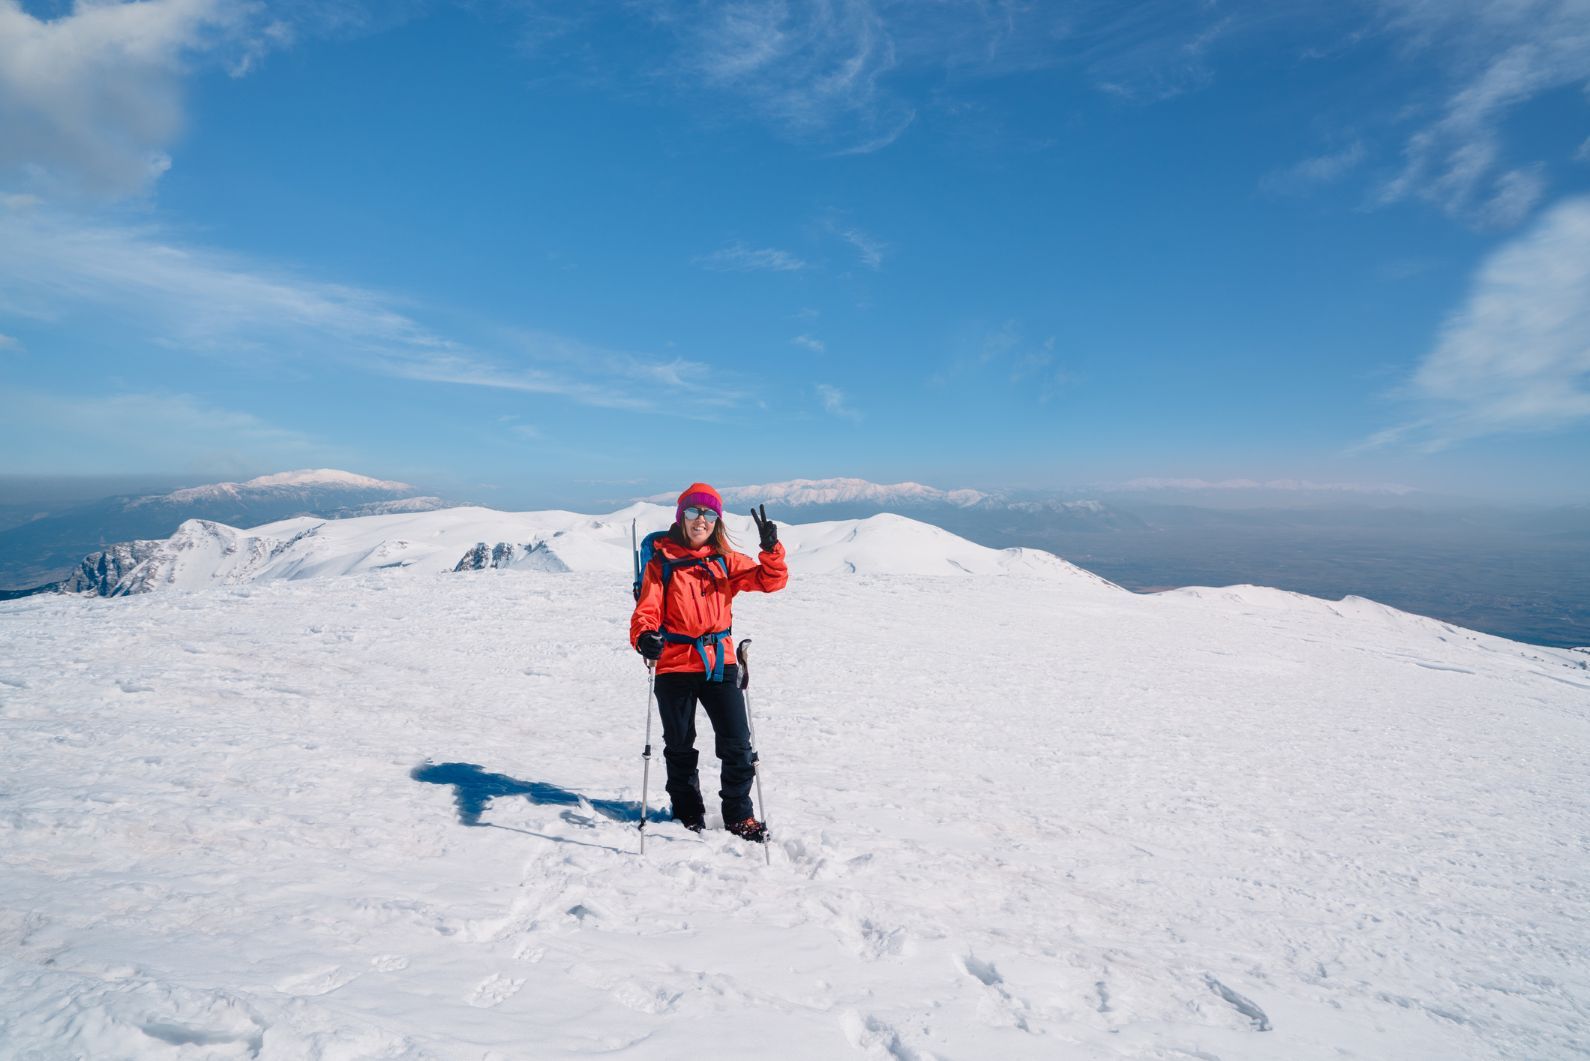 An adventurer throws up a peace sign after reaching the top of a mountain plateau. Photo: Getty